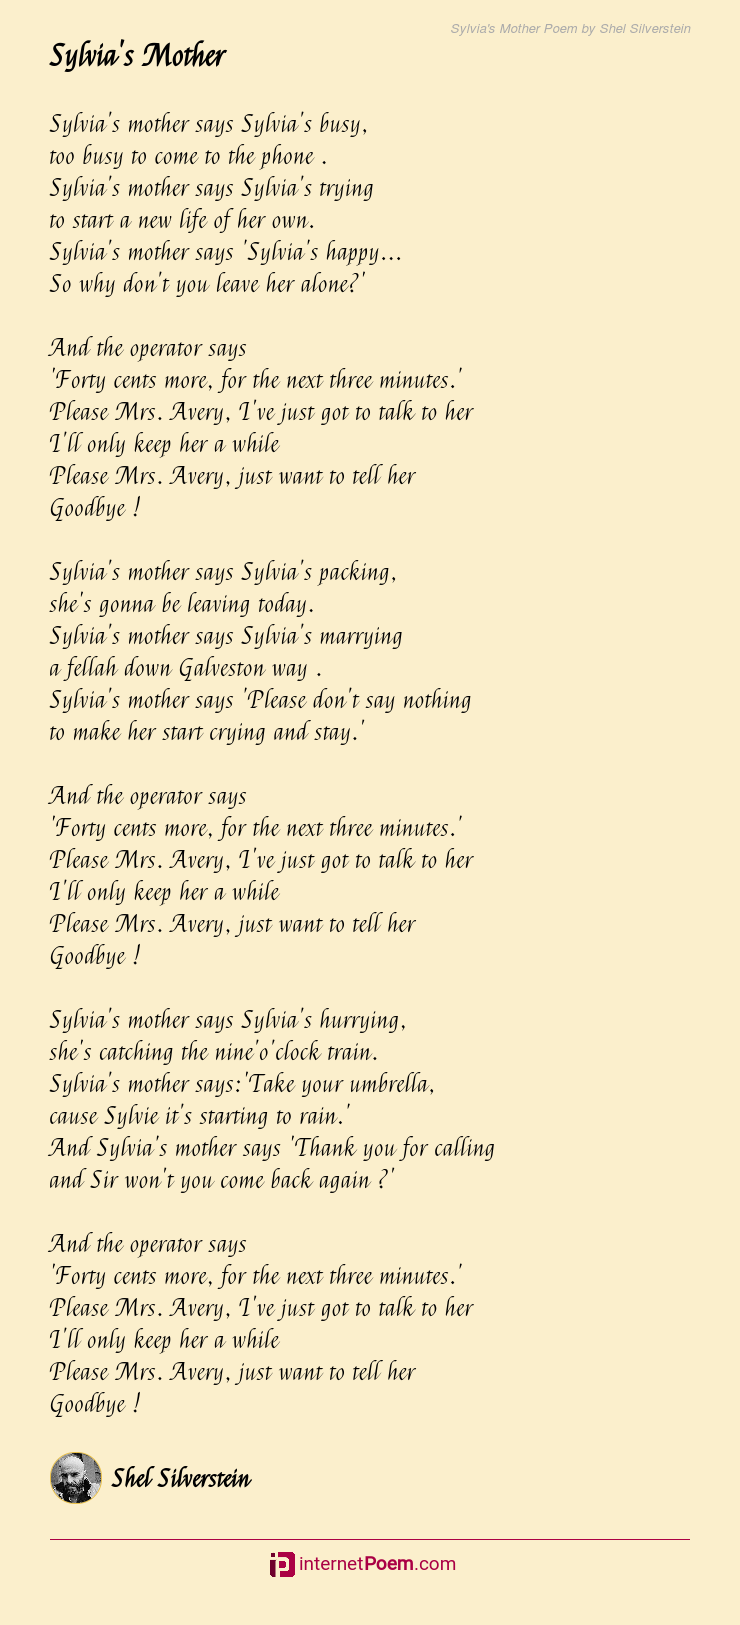 sylvia-s-mother-poem-by-shel-silverstein.png